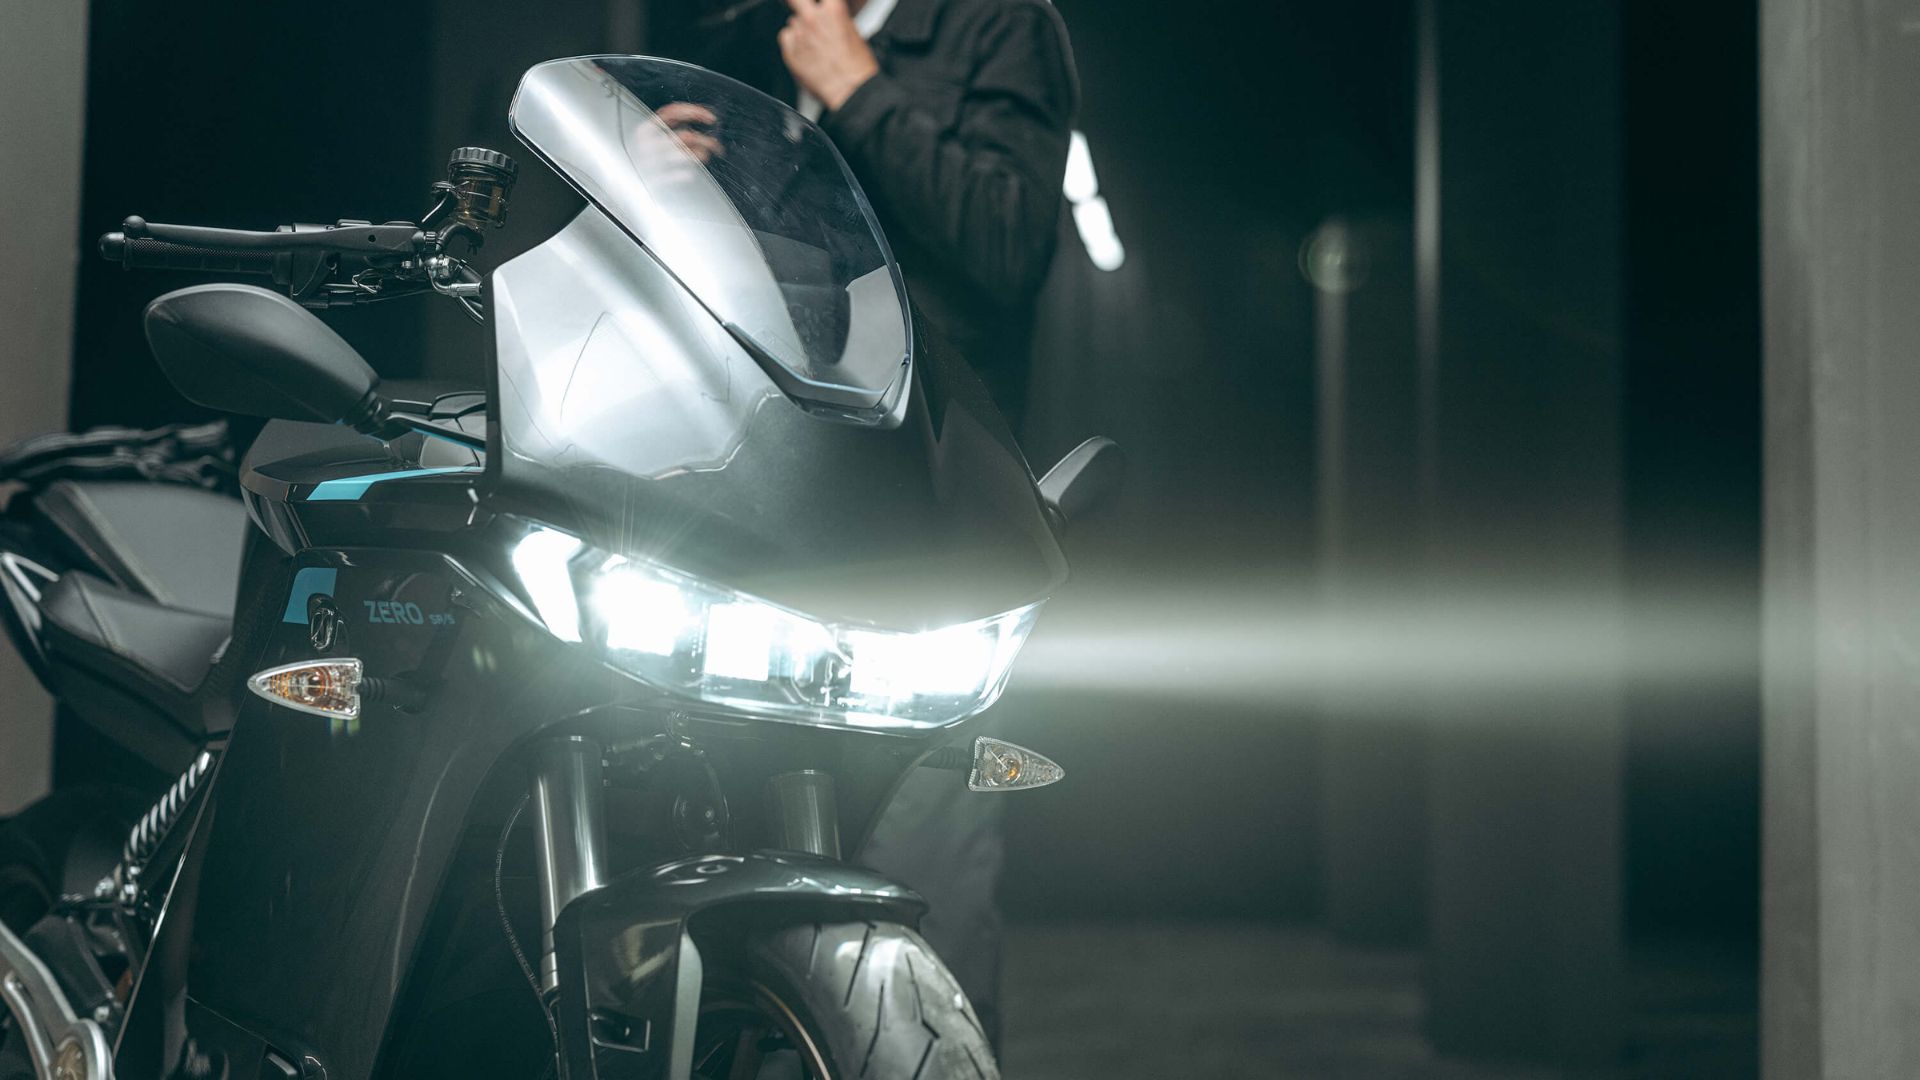 say goodbye to charging anxiety with zero motorcycle’s new technology